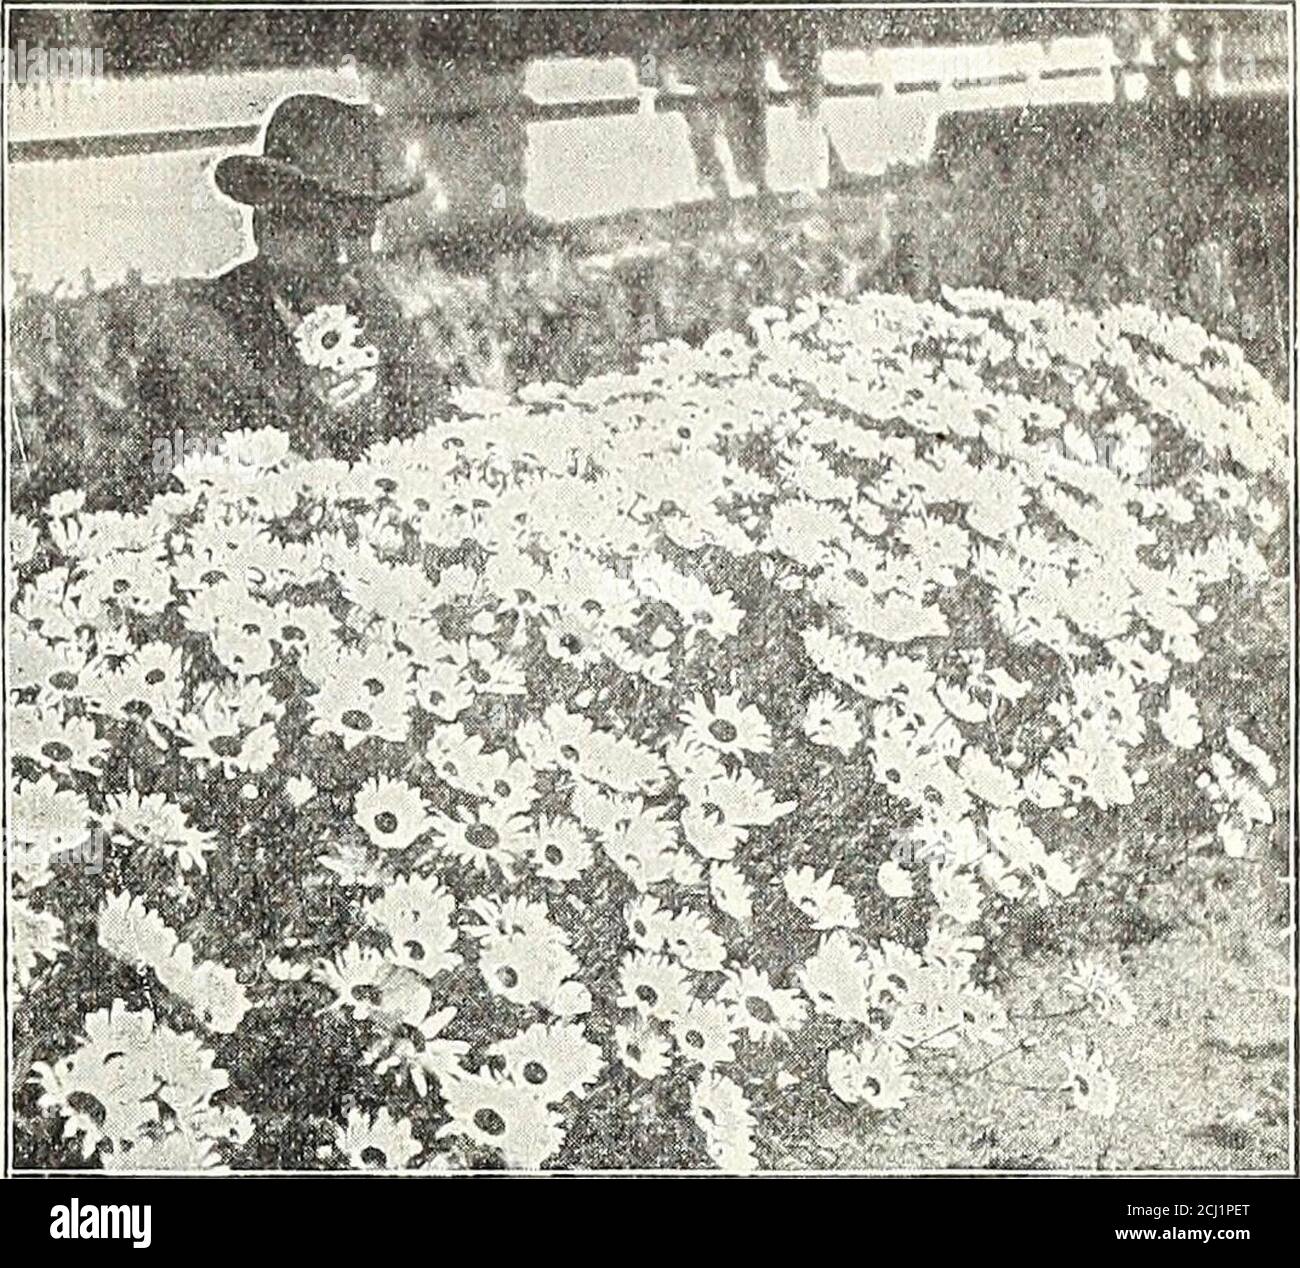 . Dreer's autumn 1904 catalogue . of pure white flowers in July; 6 ft. 25 cts. each ; $2.50 per doz.Claytonia Virginica (Spring Beaubj). Clusters of light; pink very early in the spring.Clematis Davidiana. Bell-shaped flowers of deep lavender-blue, very fragrant: .Vug. and Sept.; 3 ft. Integritblia. Blue flowers in July and August; 2 ft. 25cts. each; $2.50 per doz. Recta. Showy clusters of white; June and July; 3 ft. 25cts. each; $2.50 per doz.Coreopsis Lanceolata GrandiHora. An old favorite, with golden-yellow flowers the entire season.Delphinium (Hardy Larkspurs). Chinensis. A pretty variety Stock Photo